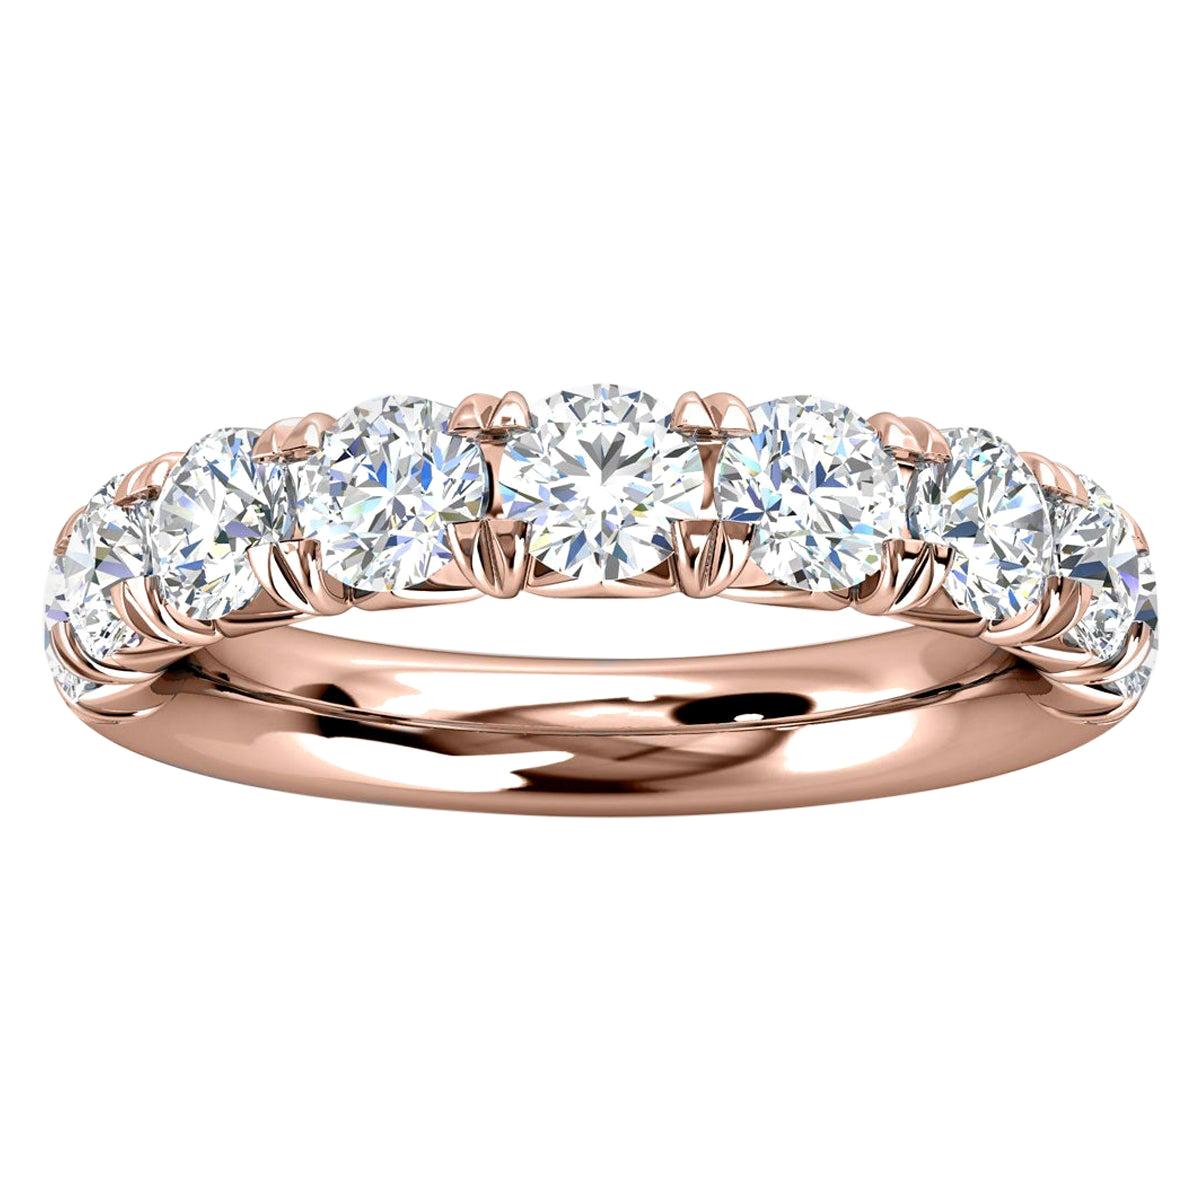 For Sale:  18k Rose Gold Voyage French Pave Diamond Ring '1 1/2 Ct. Tw'